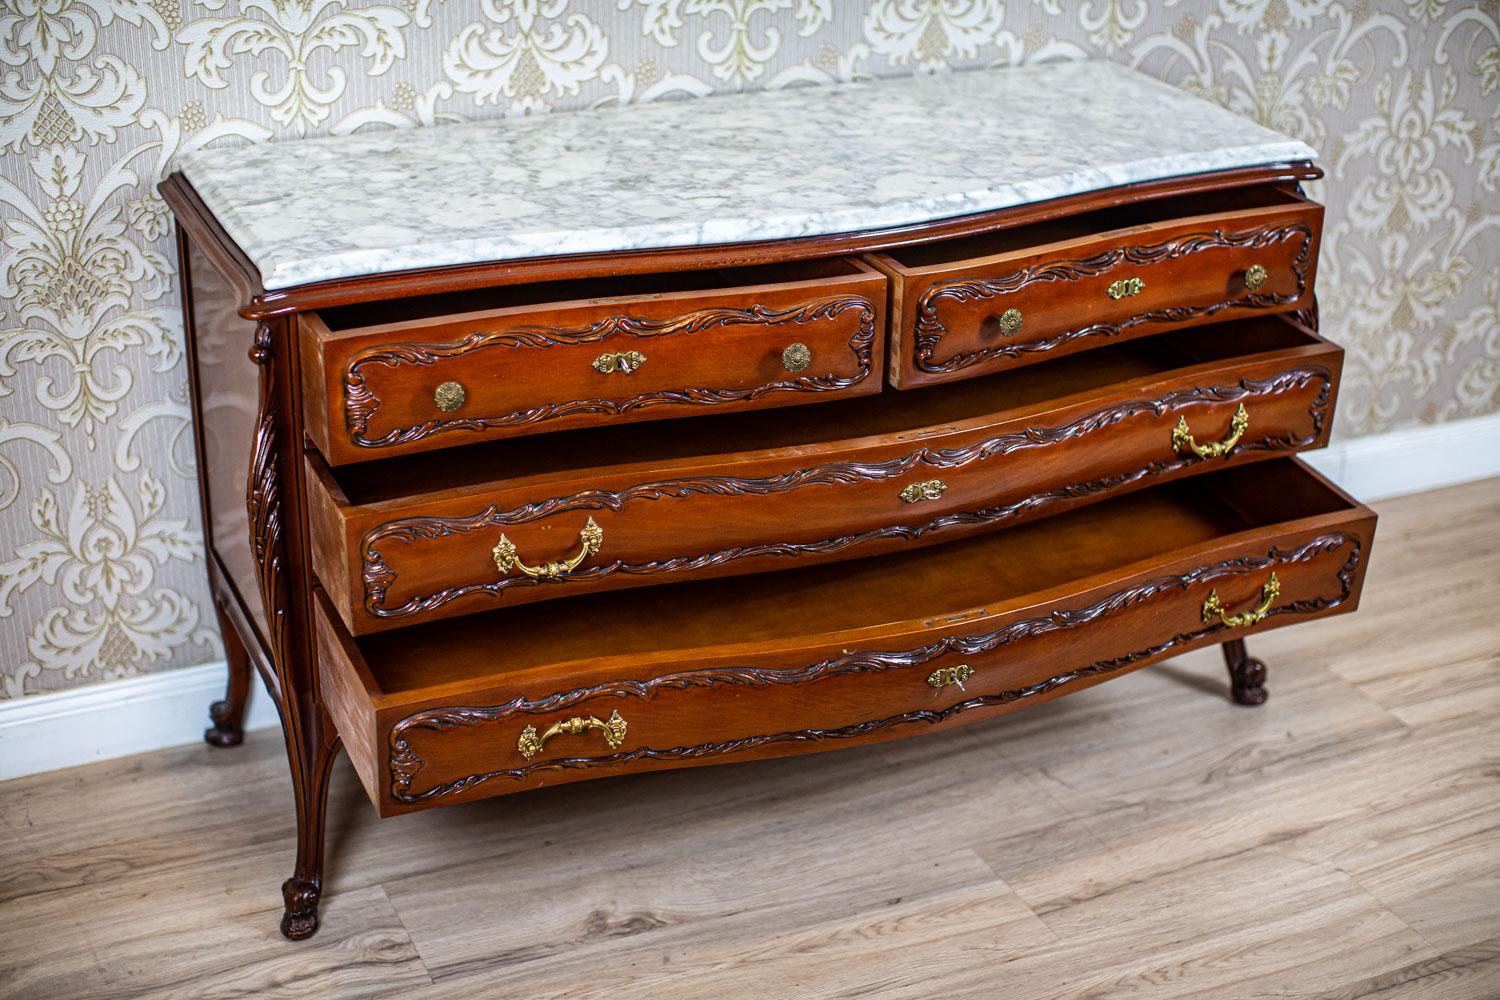 Decorative Beech Dresser From the Mid. 20th Century with Marble Top 3